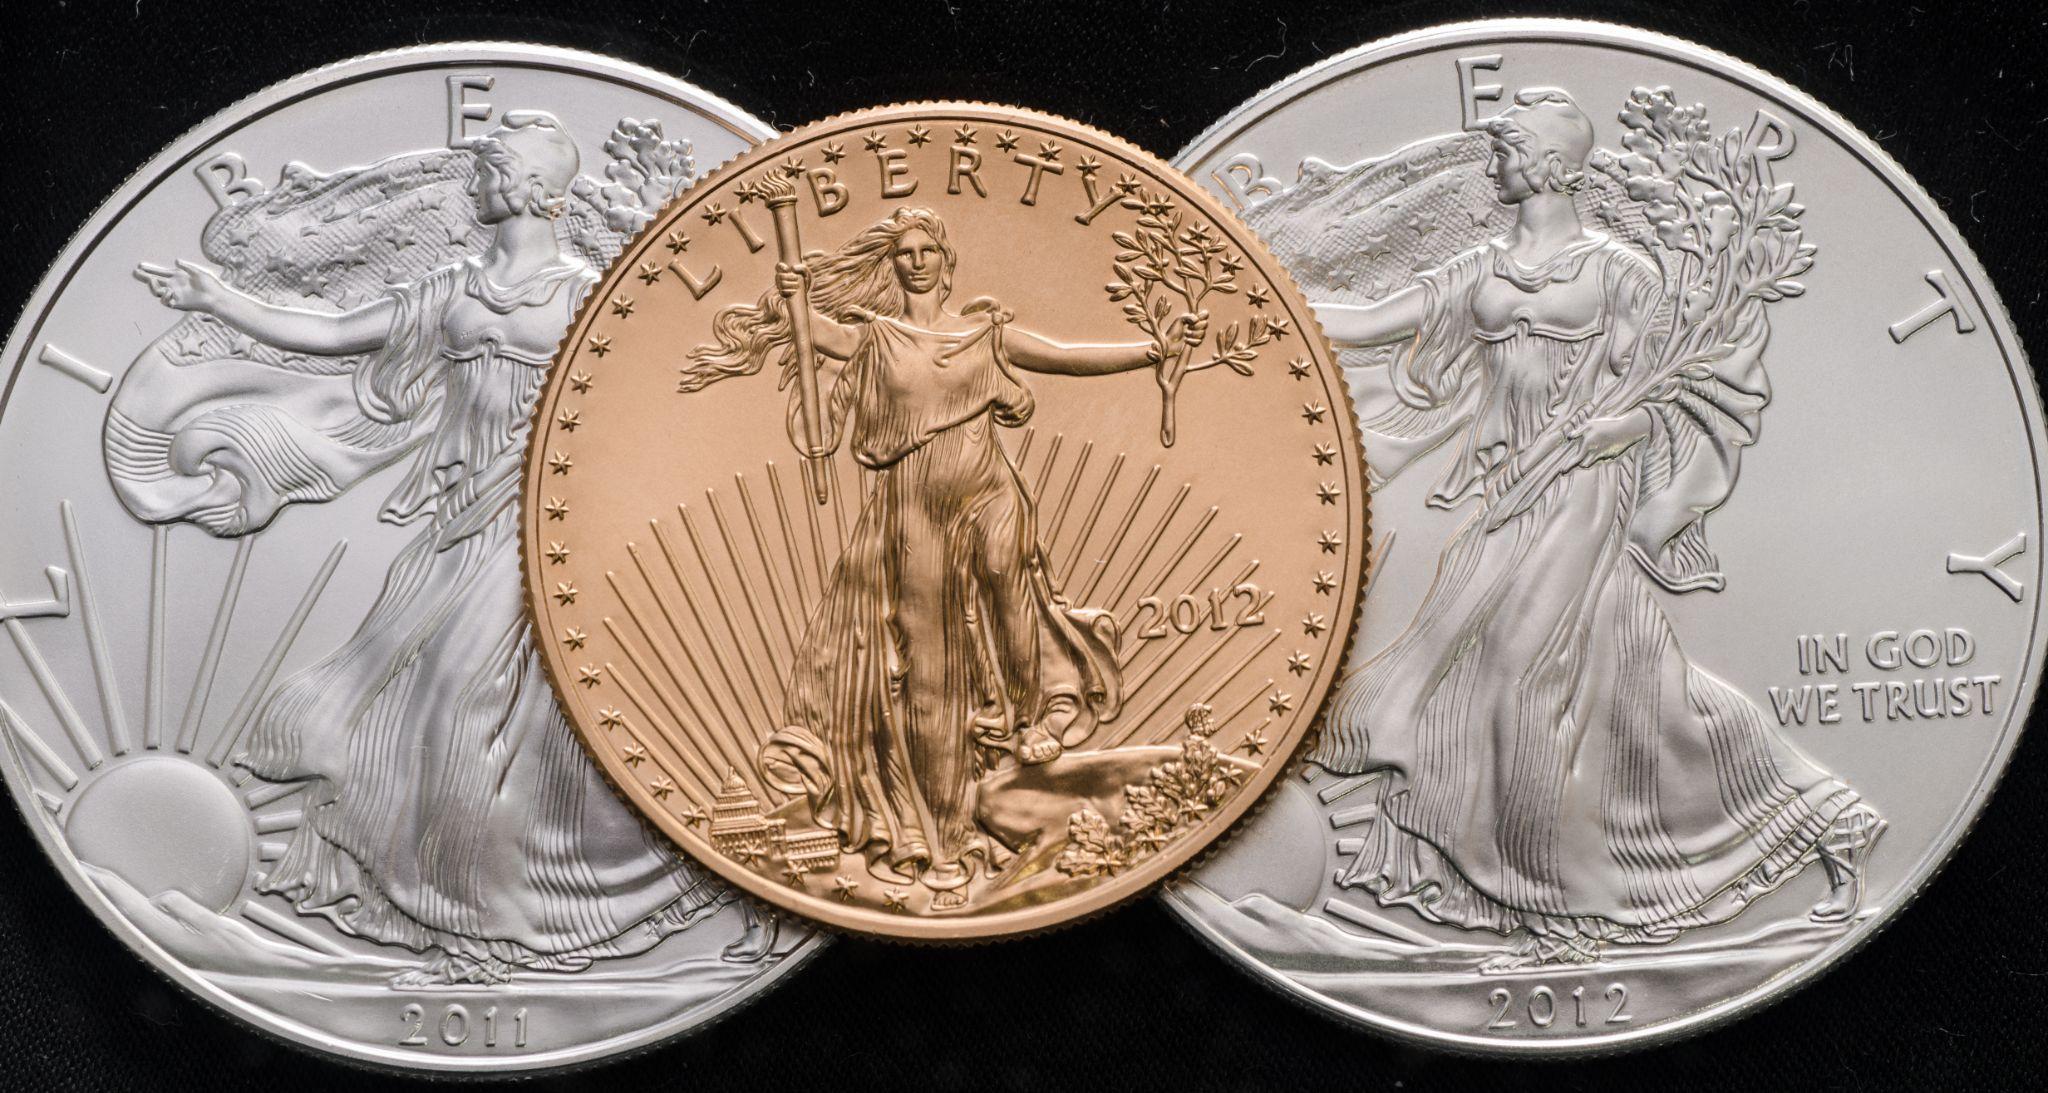 Three liberty coins. Two silver 2012 coins in the background and one gold 2012 liberty coin in the middle.